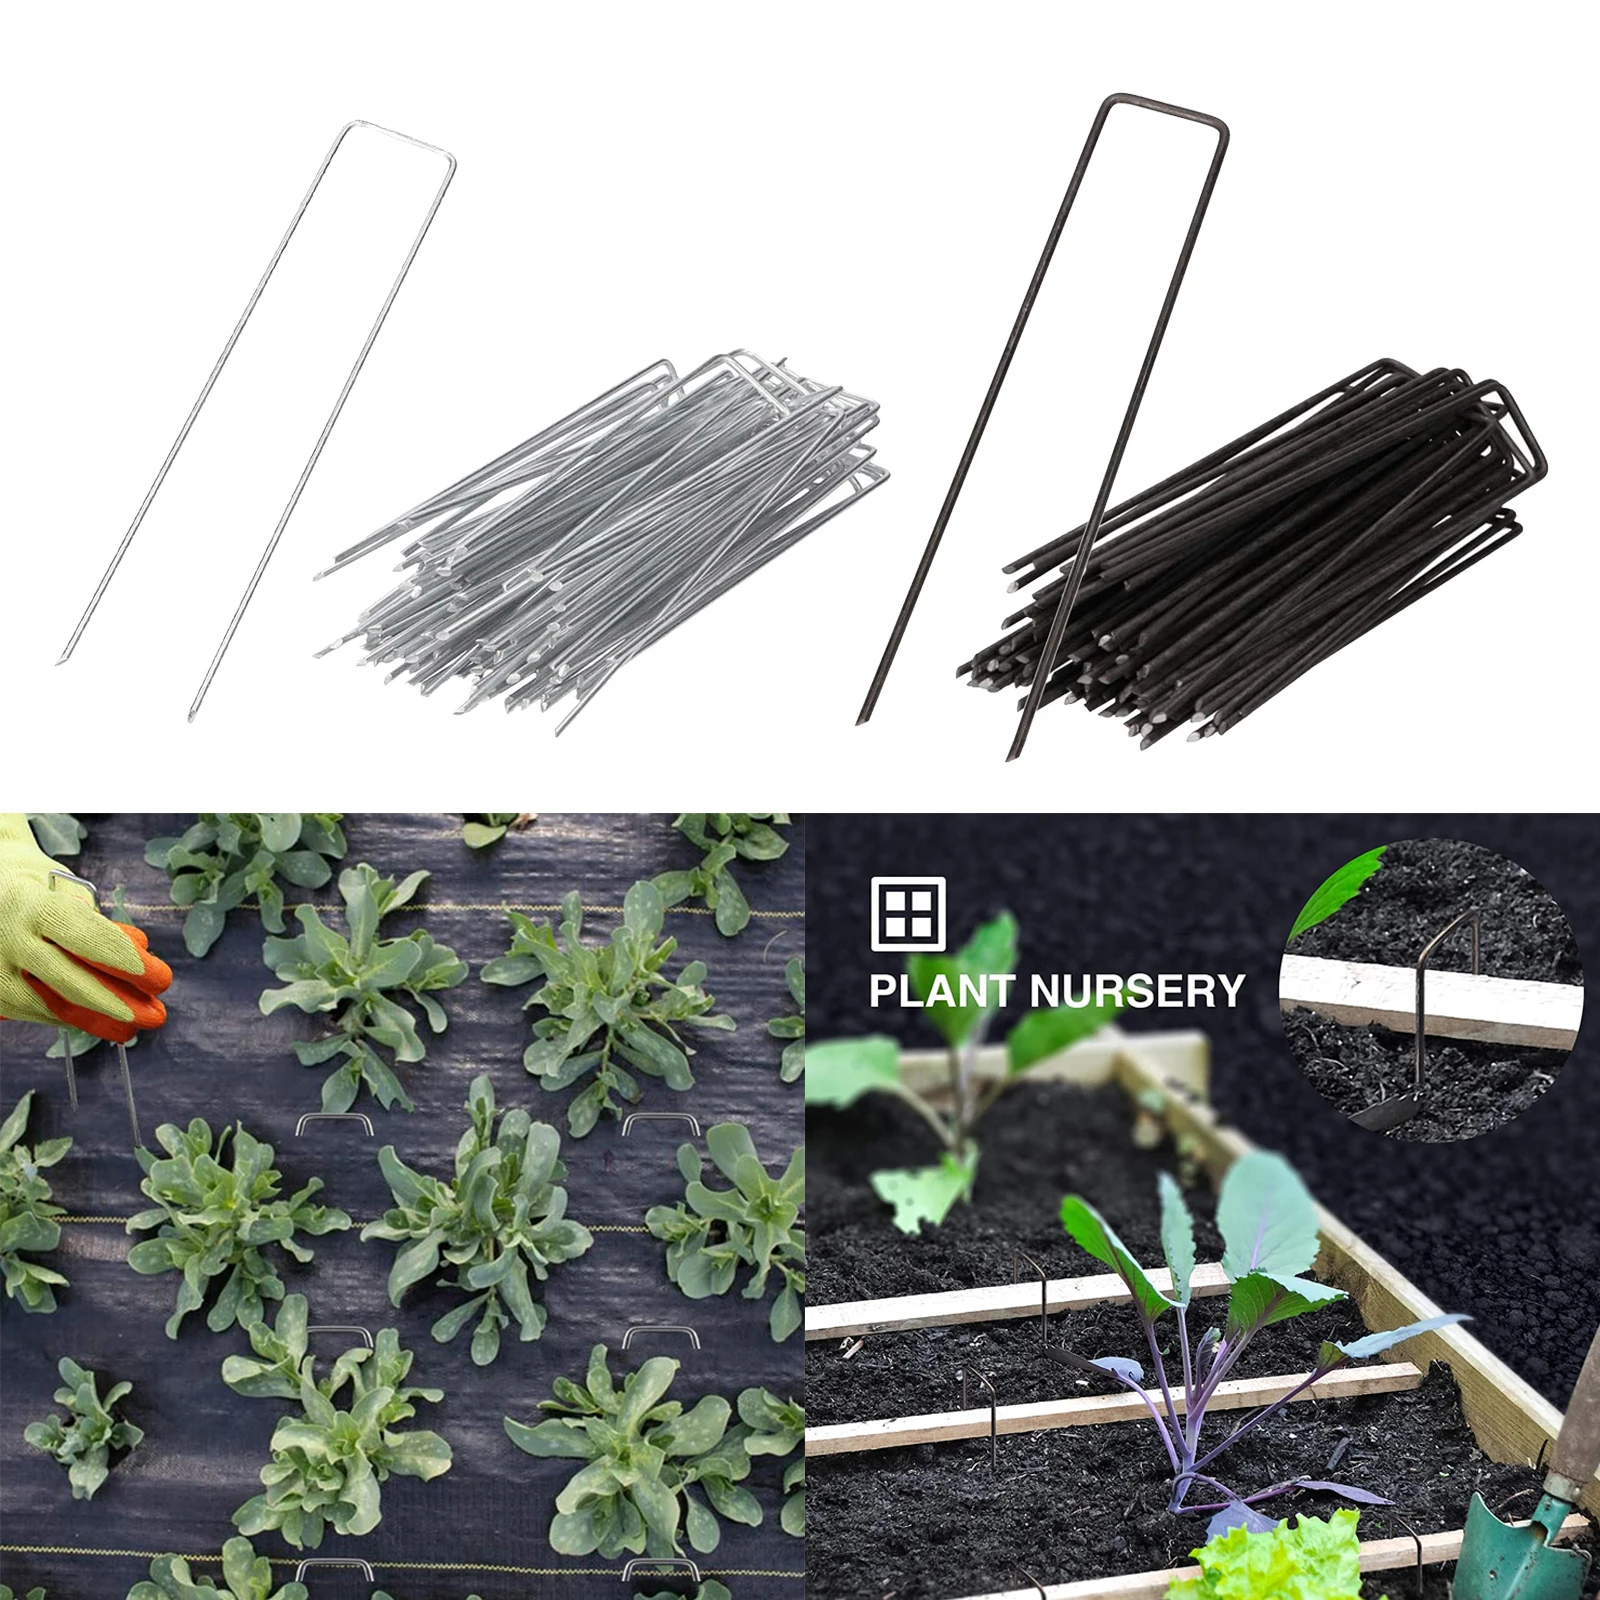 5 Galvanised  Stakes  Turf Staples for Artificial Grass Outdoor Wires Cords Tents Tarps